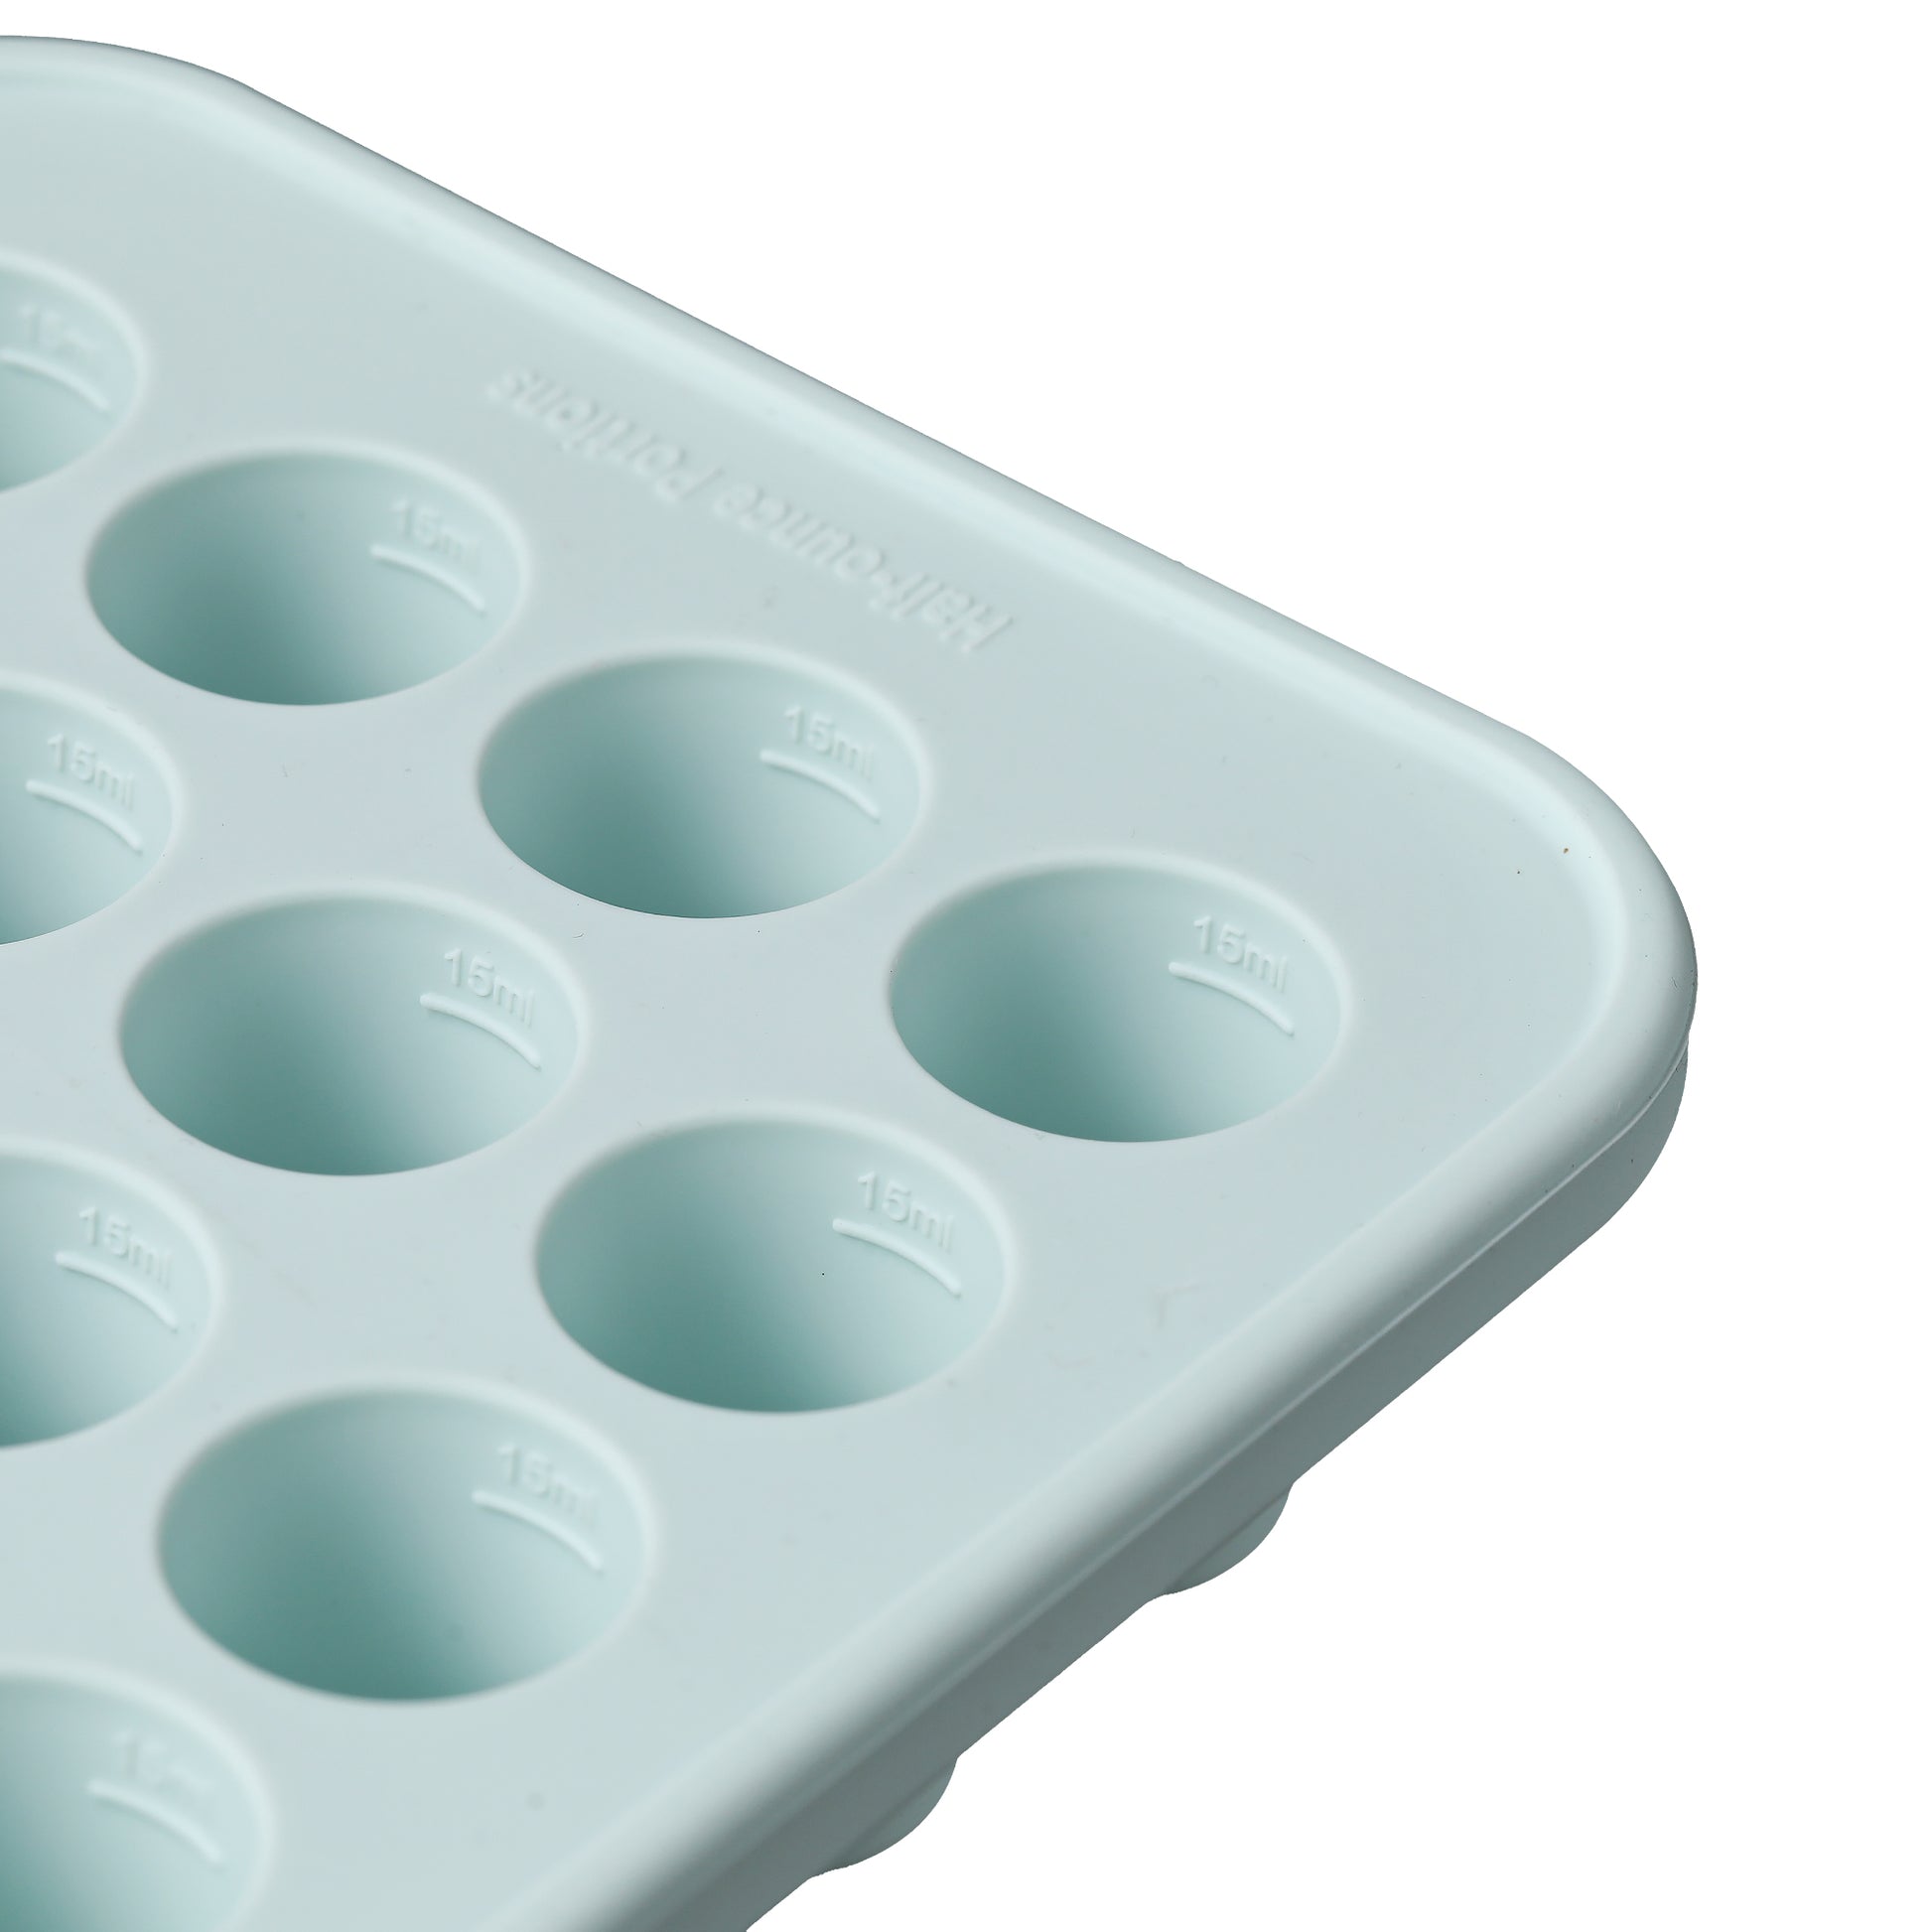 The Absolute Best Uses For Ice Cube Trays